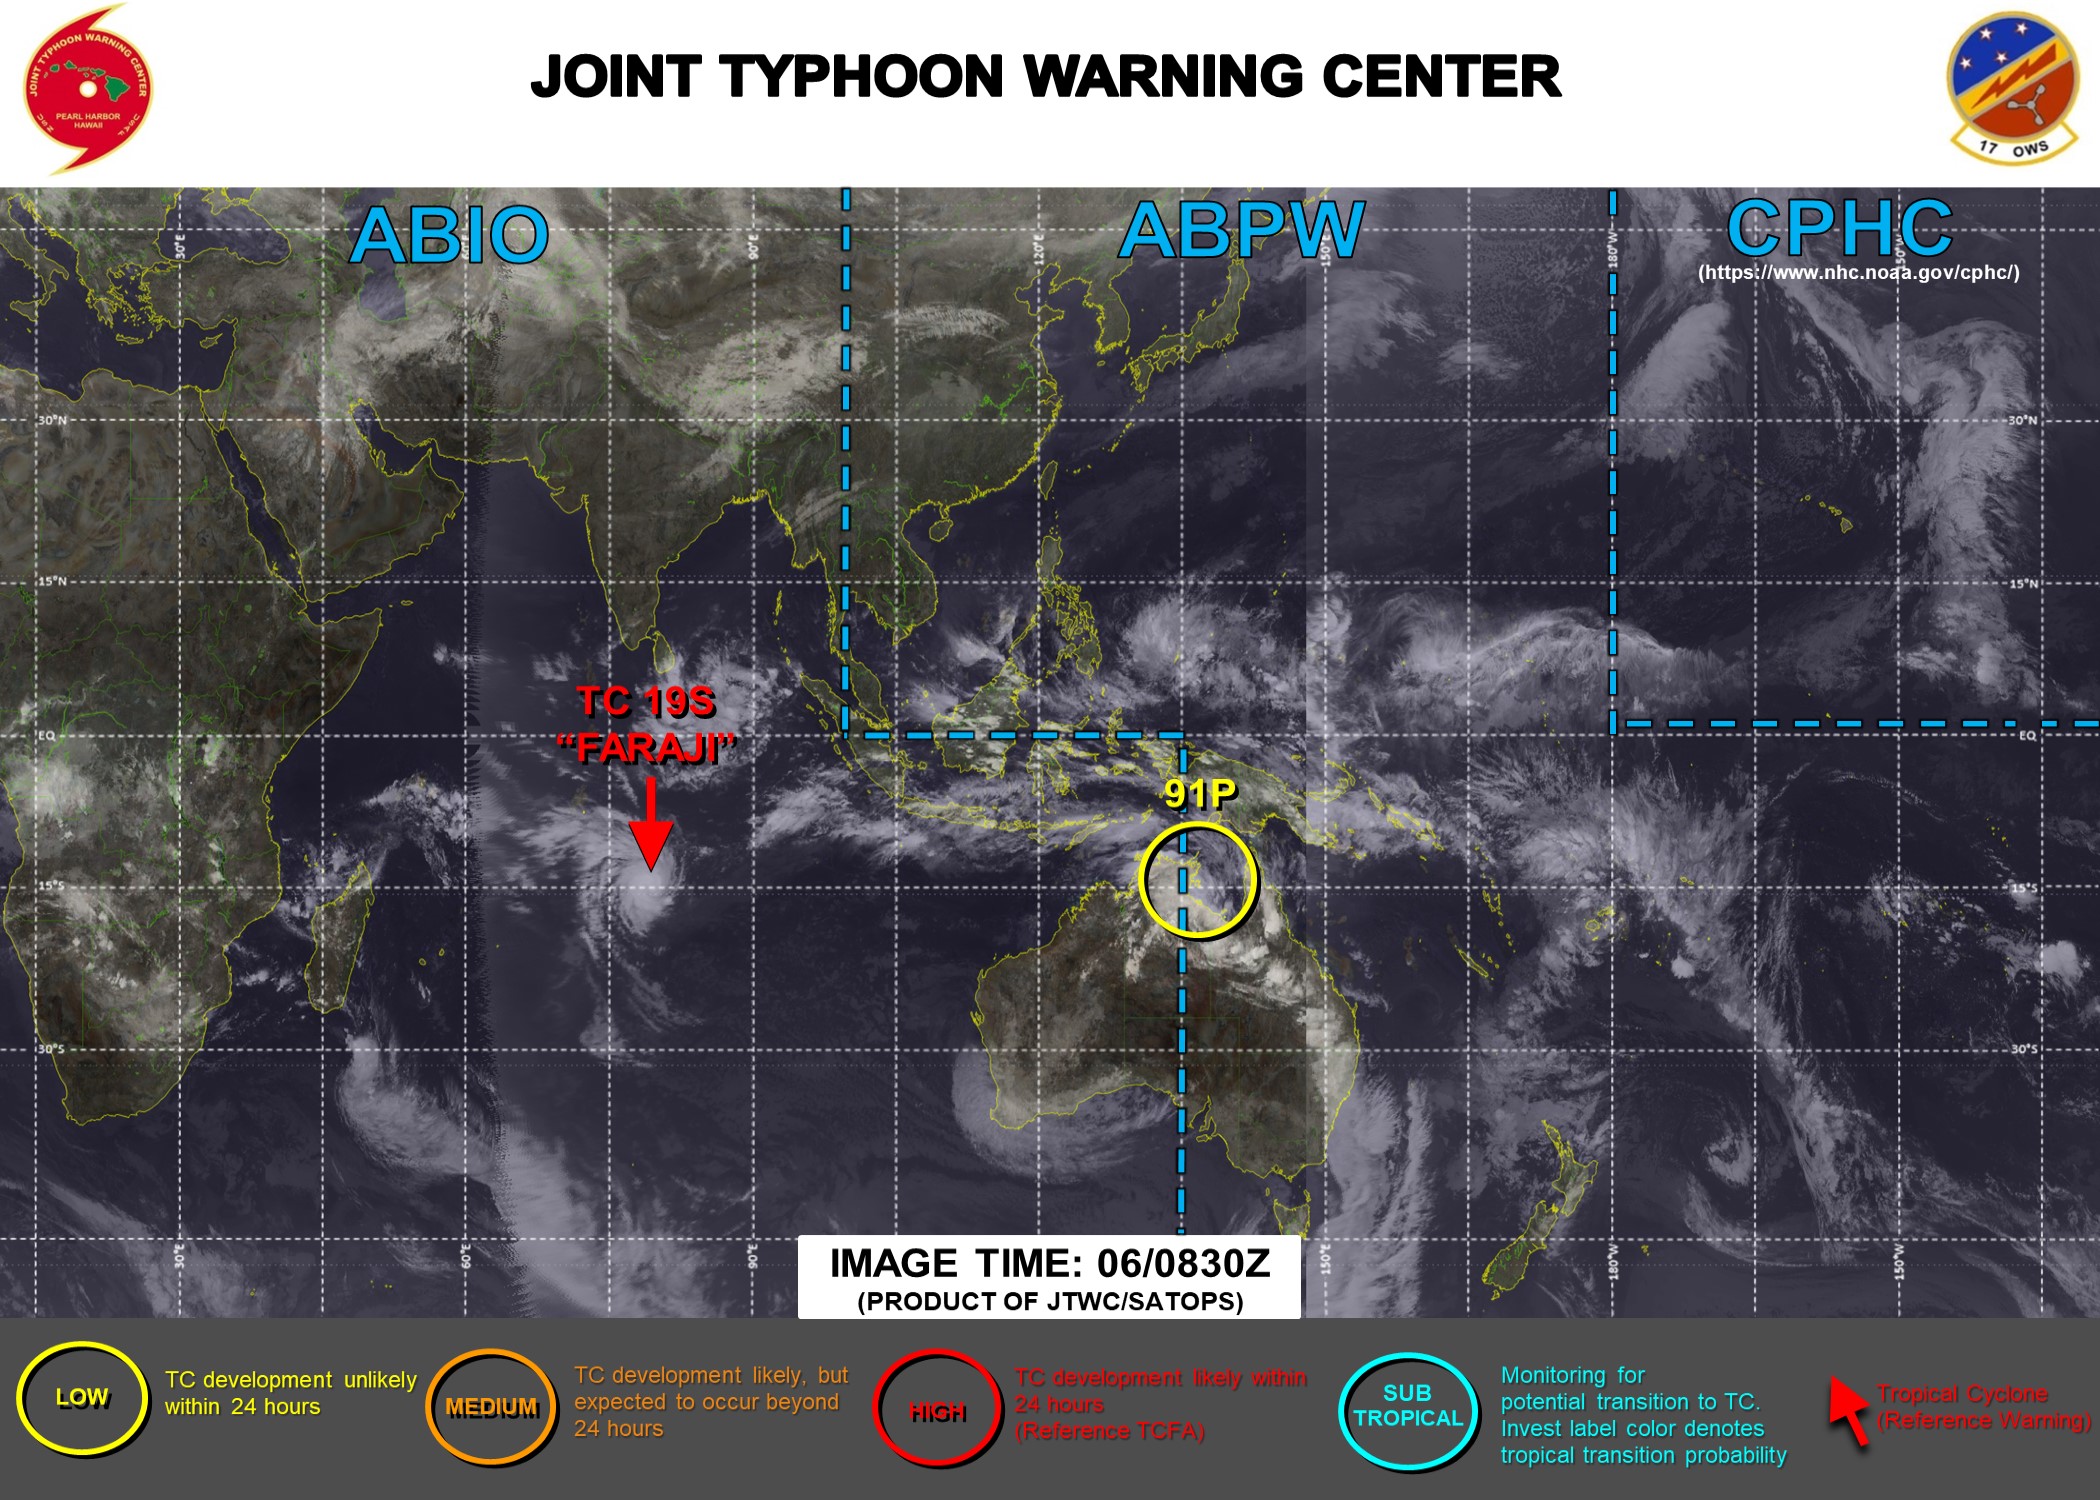 06/0830UTC. JTWC IS ISSUING 12HOURLY WARNINGS ON 19S(FARAJI). 3HOURLY SATELLITE BULLETINS ARE PROVIDED FOR 19S AND 18S.